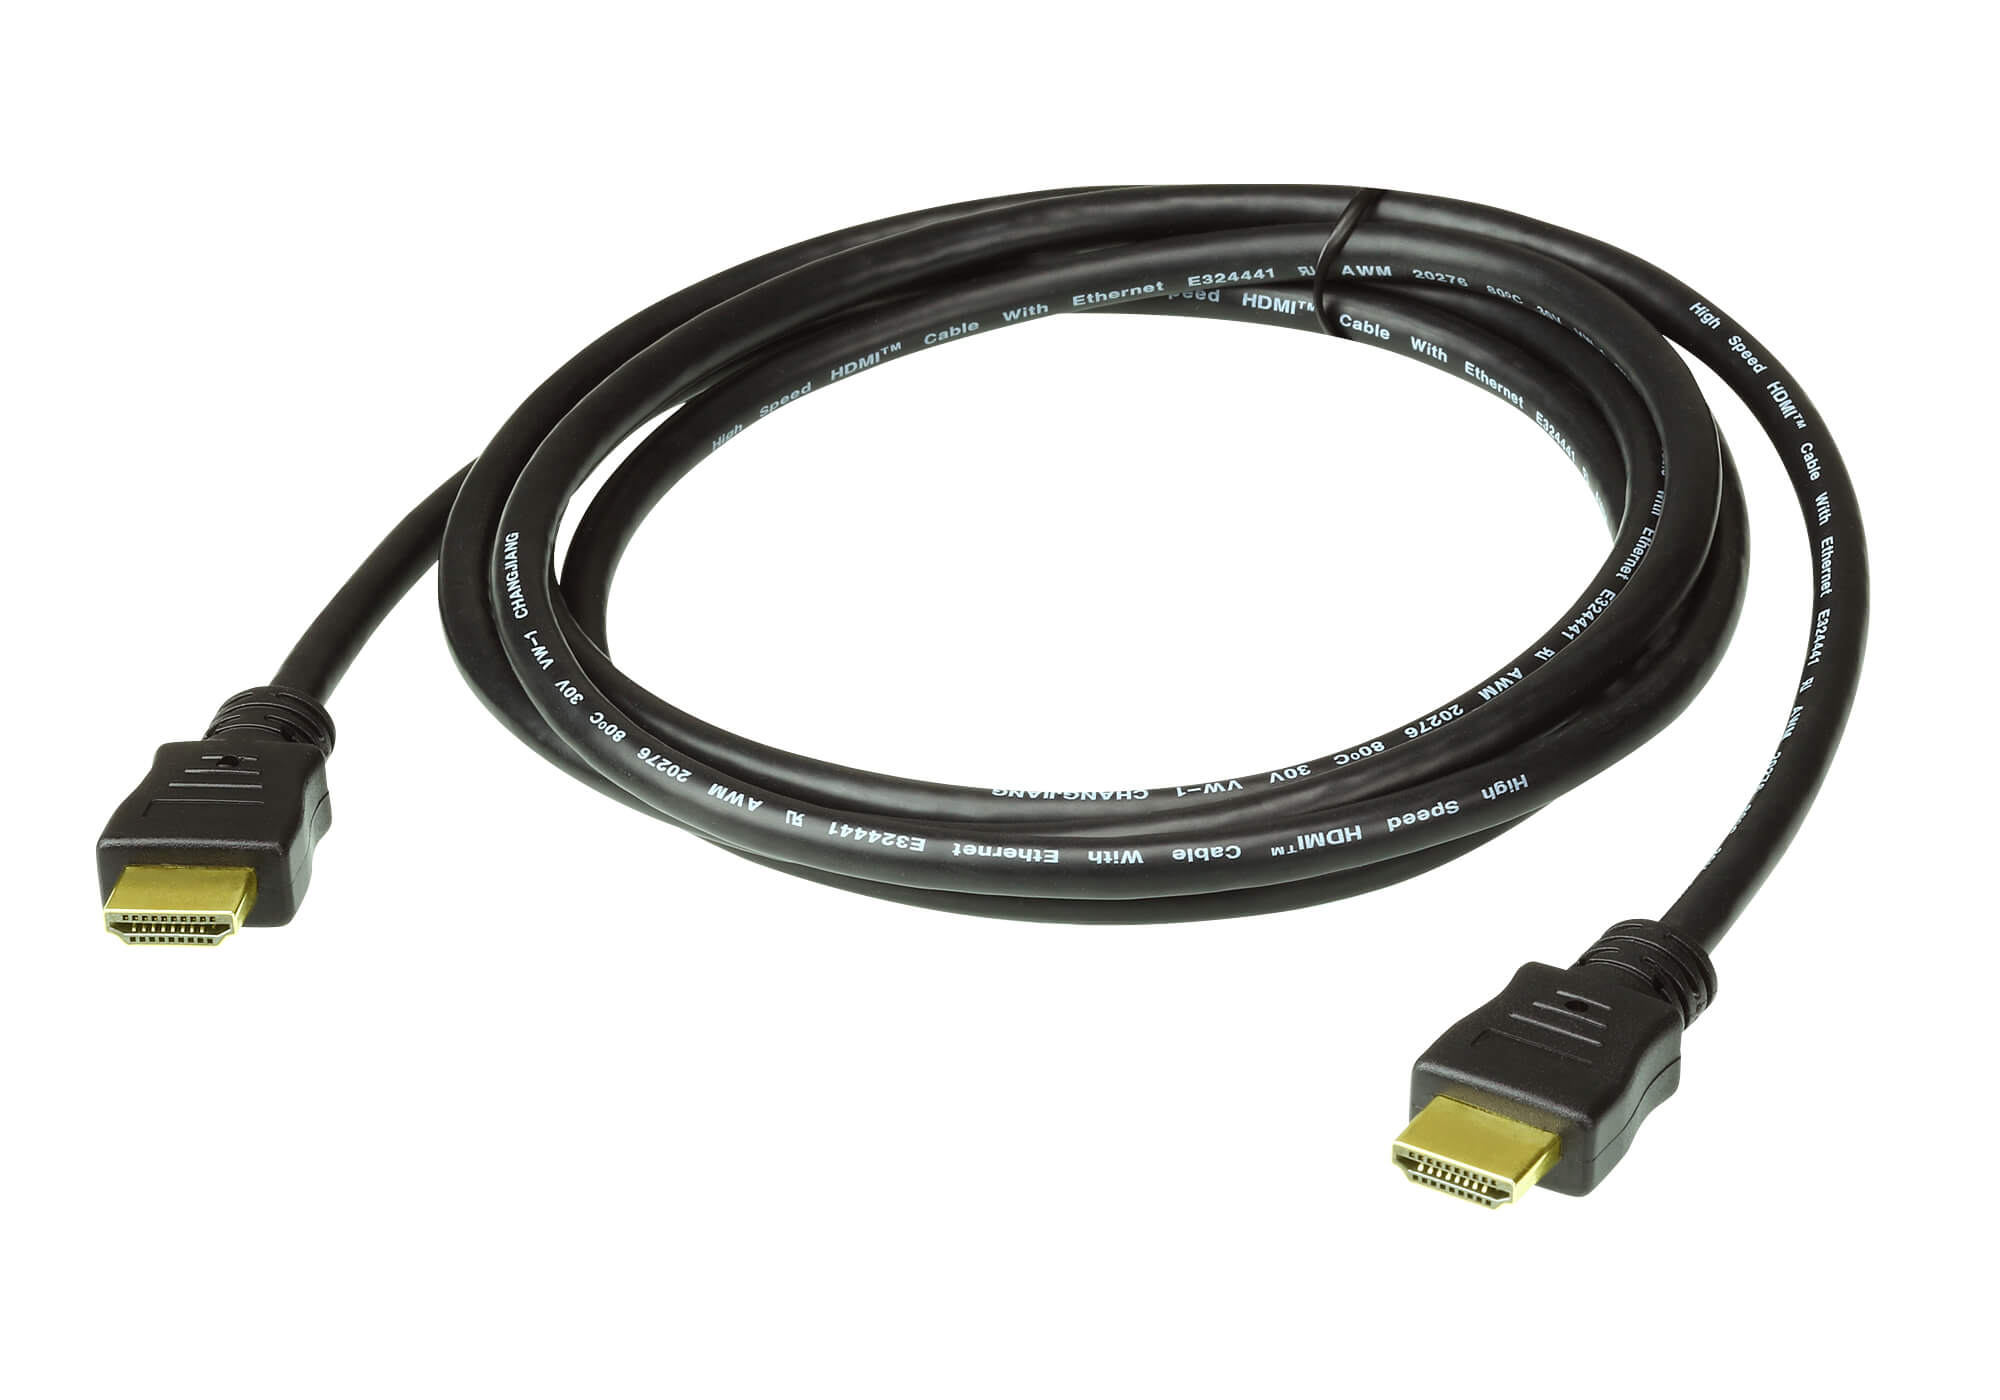 ATEN High Speed HDMI Cable with Ethernet Support 4K UHD DCI, up to 4096 x 2160 – 10M